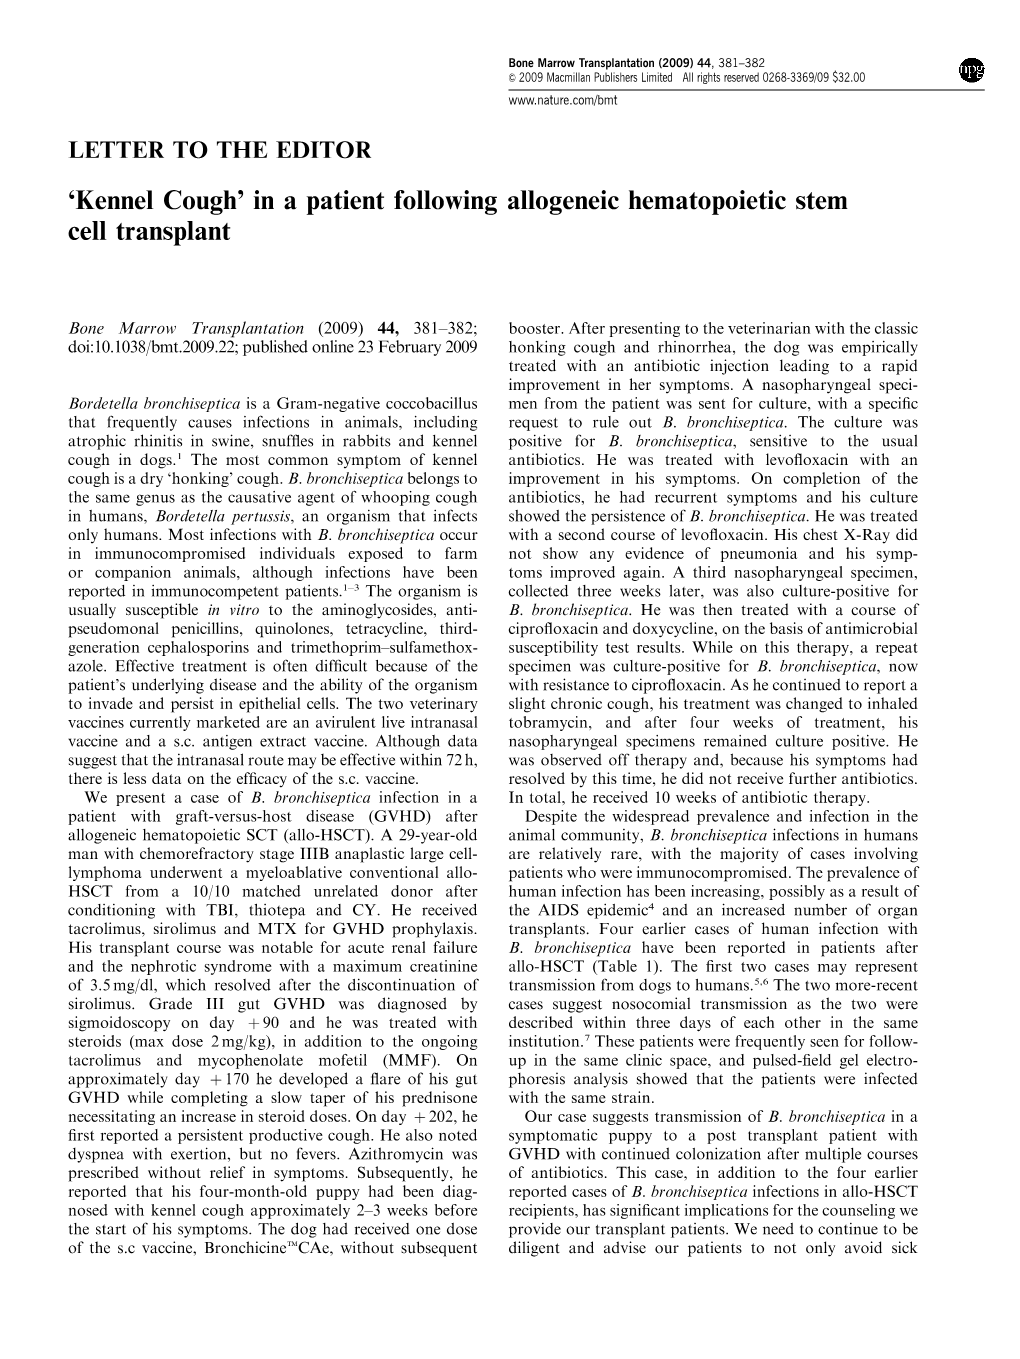 Kennel Cough’ in a Patient Following Allogeneic Hematopoietic Stem Cell Transplant